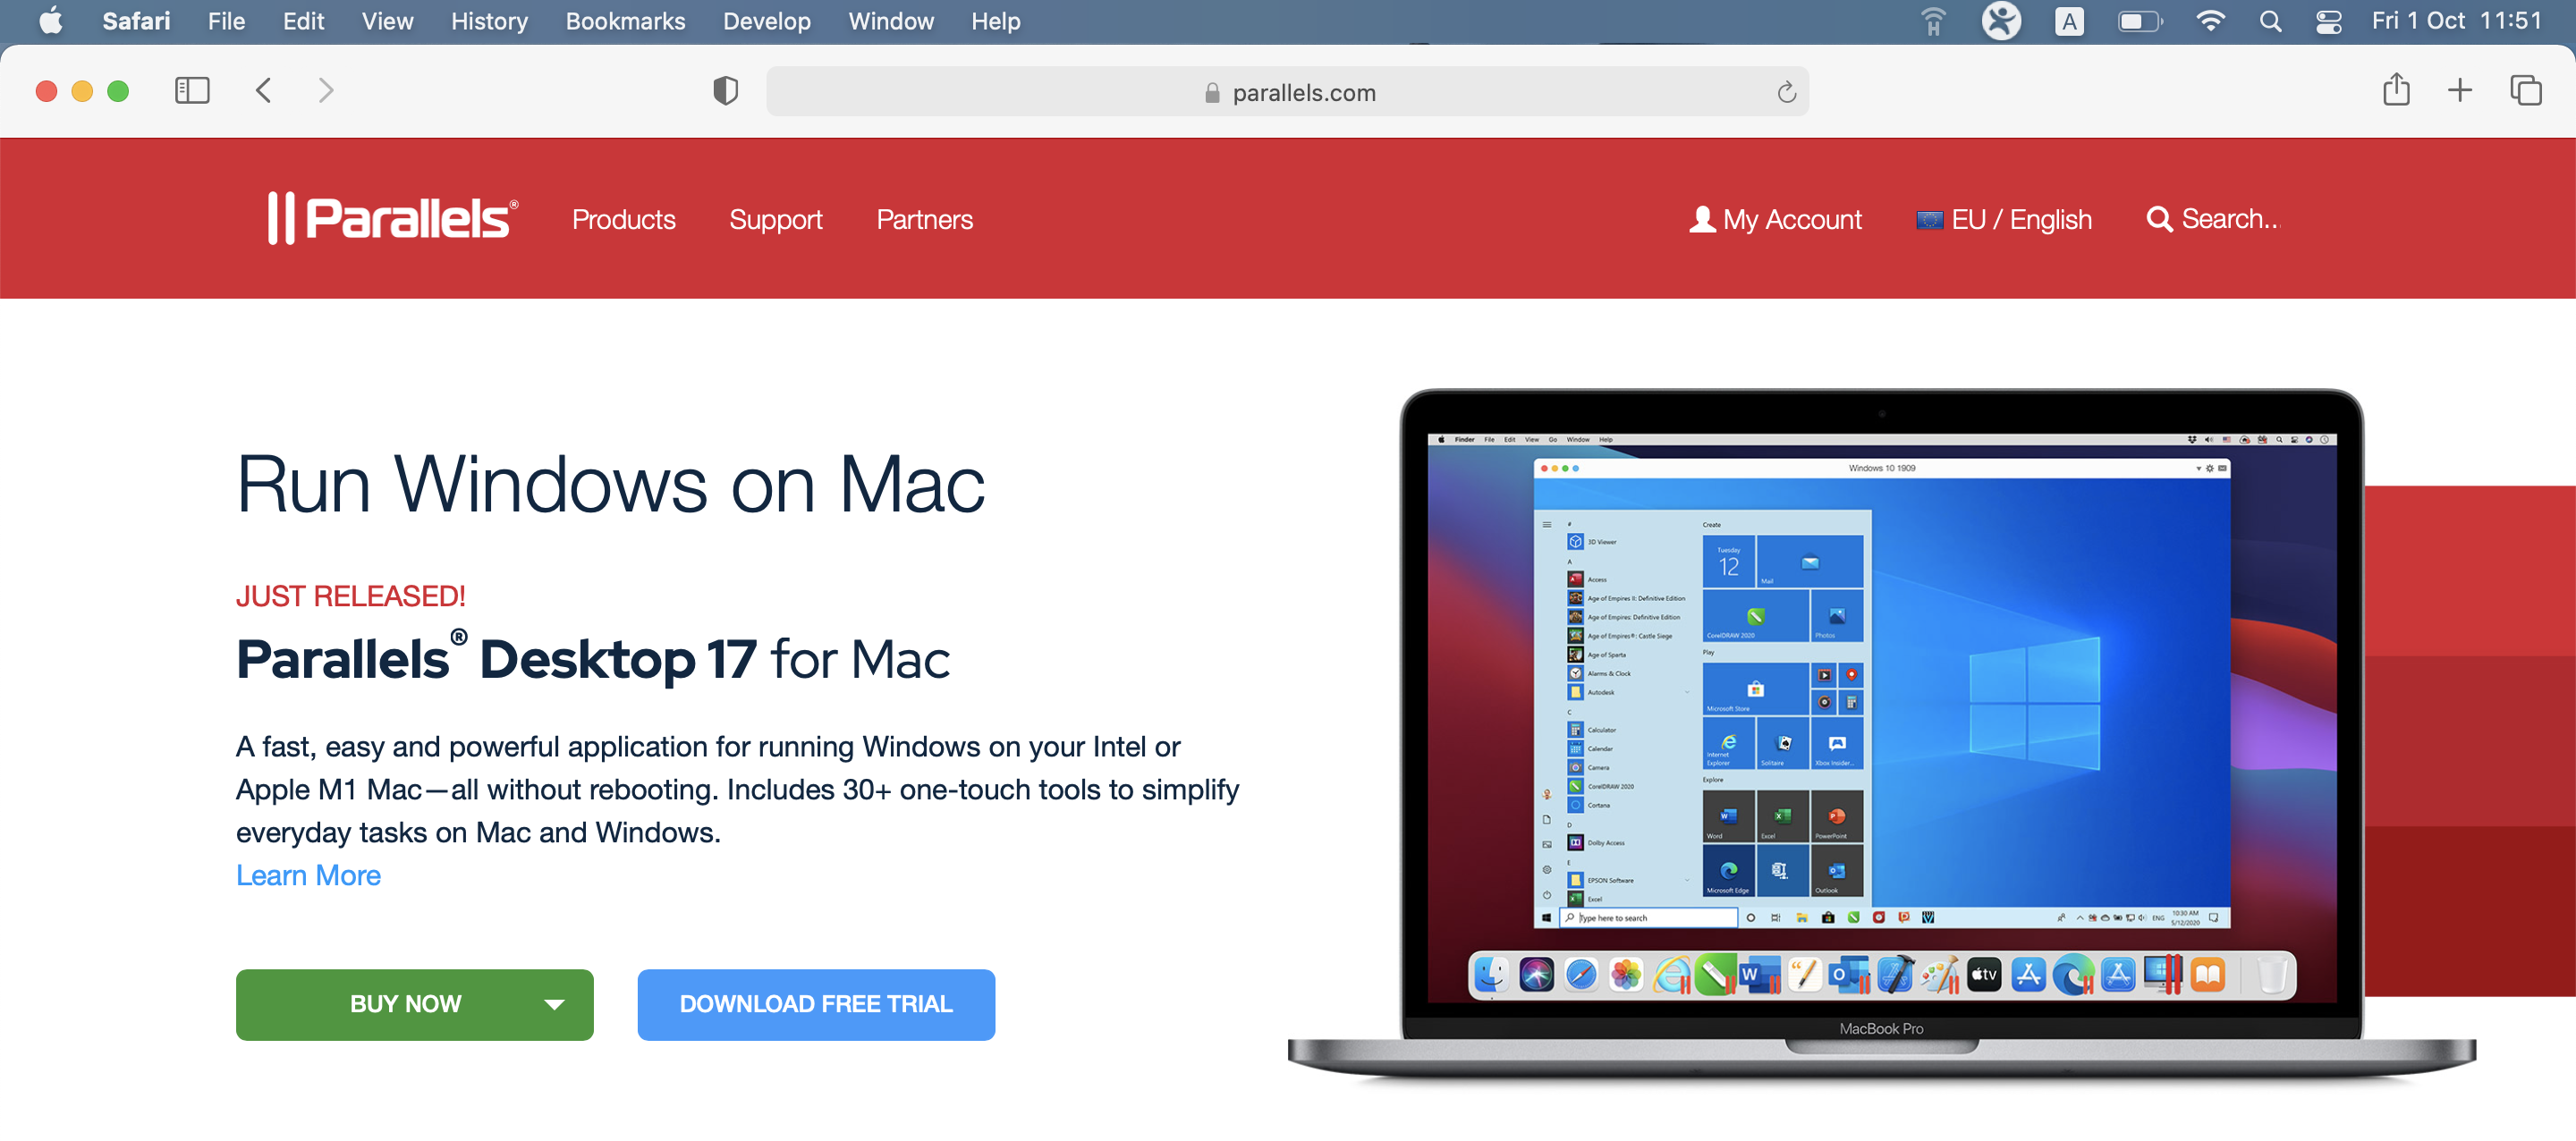 download windows 7 for mac free trial